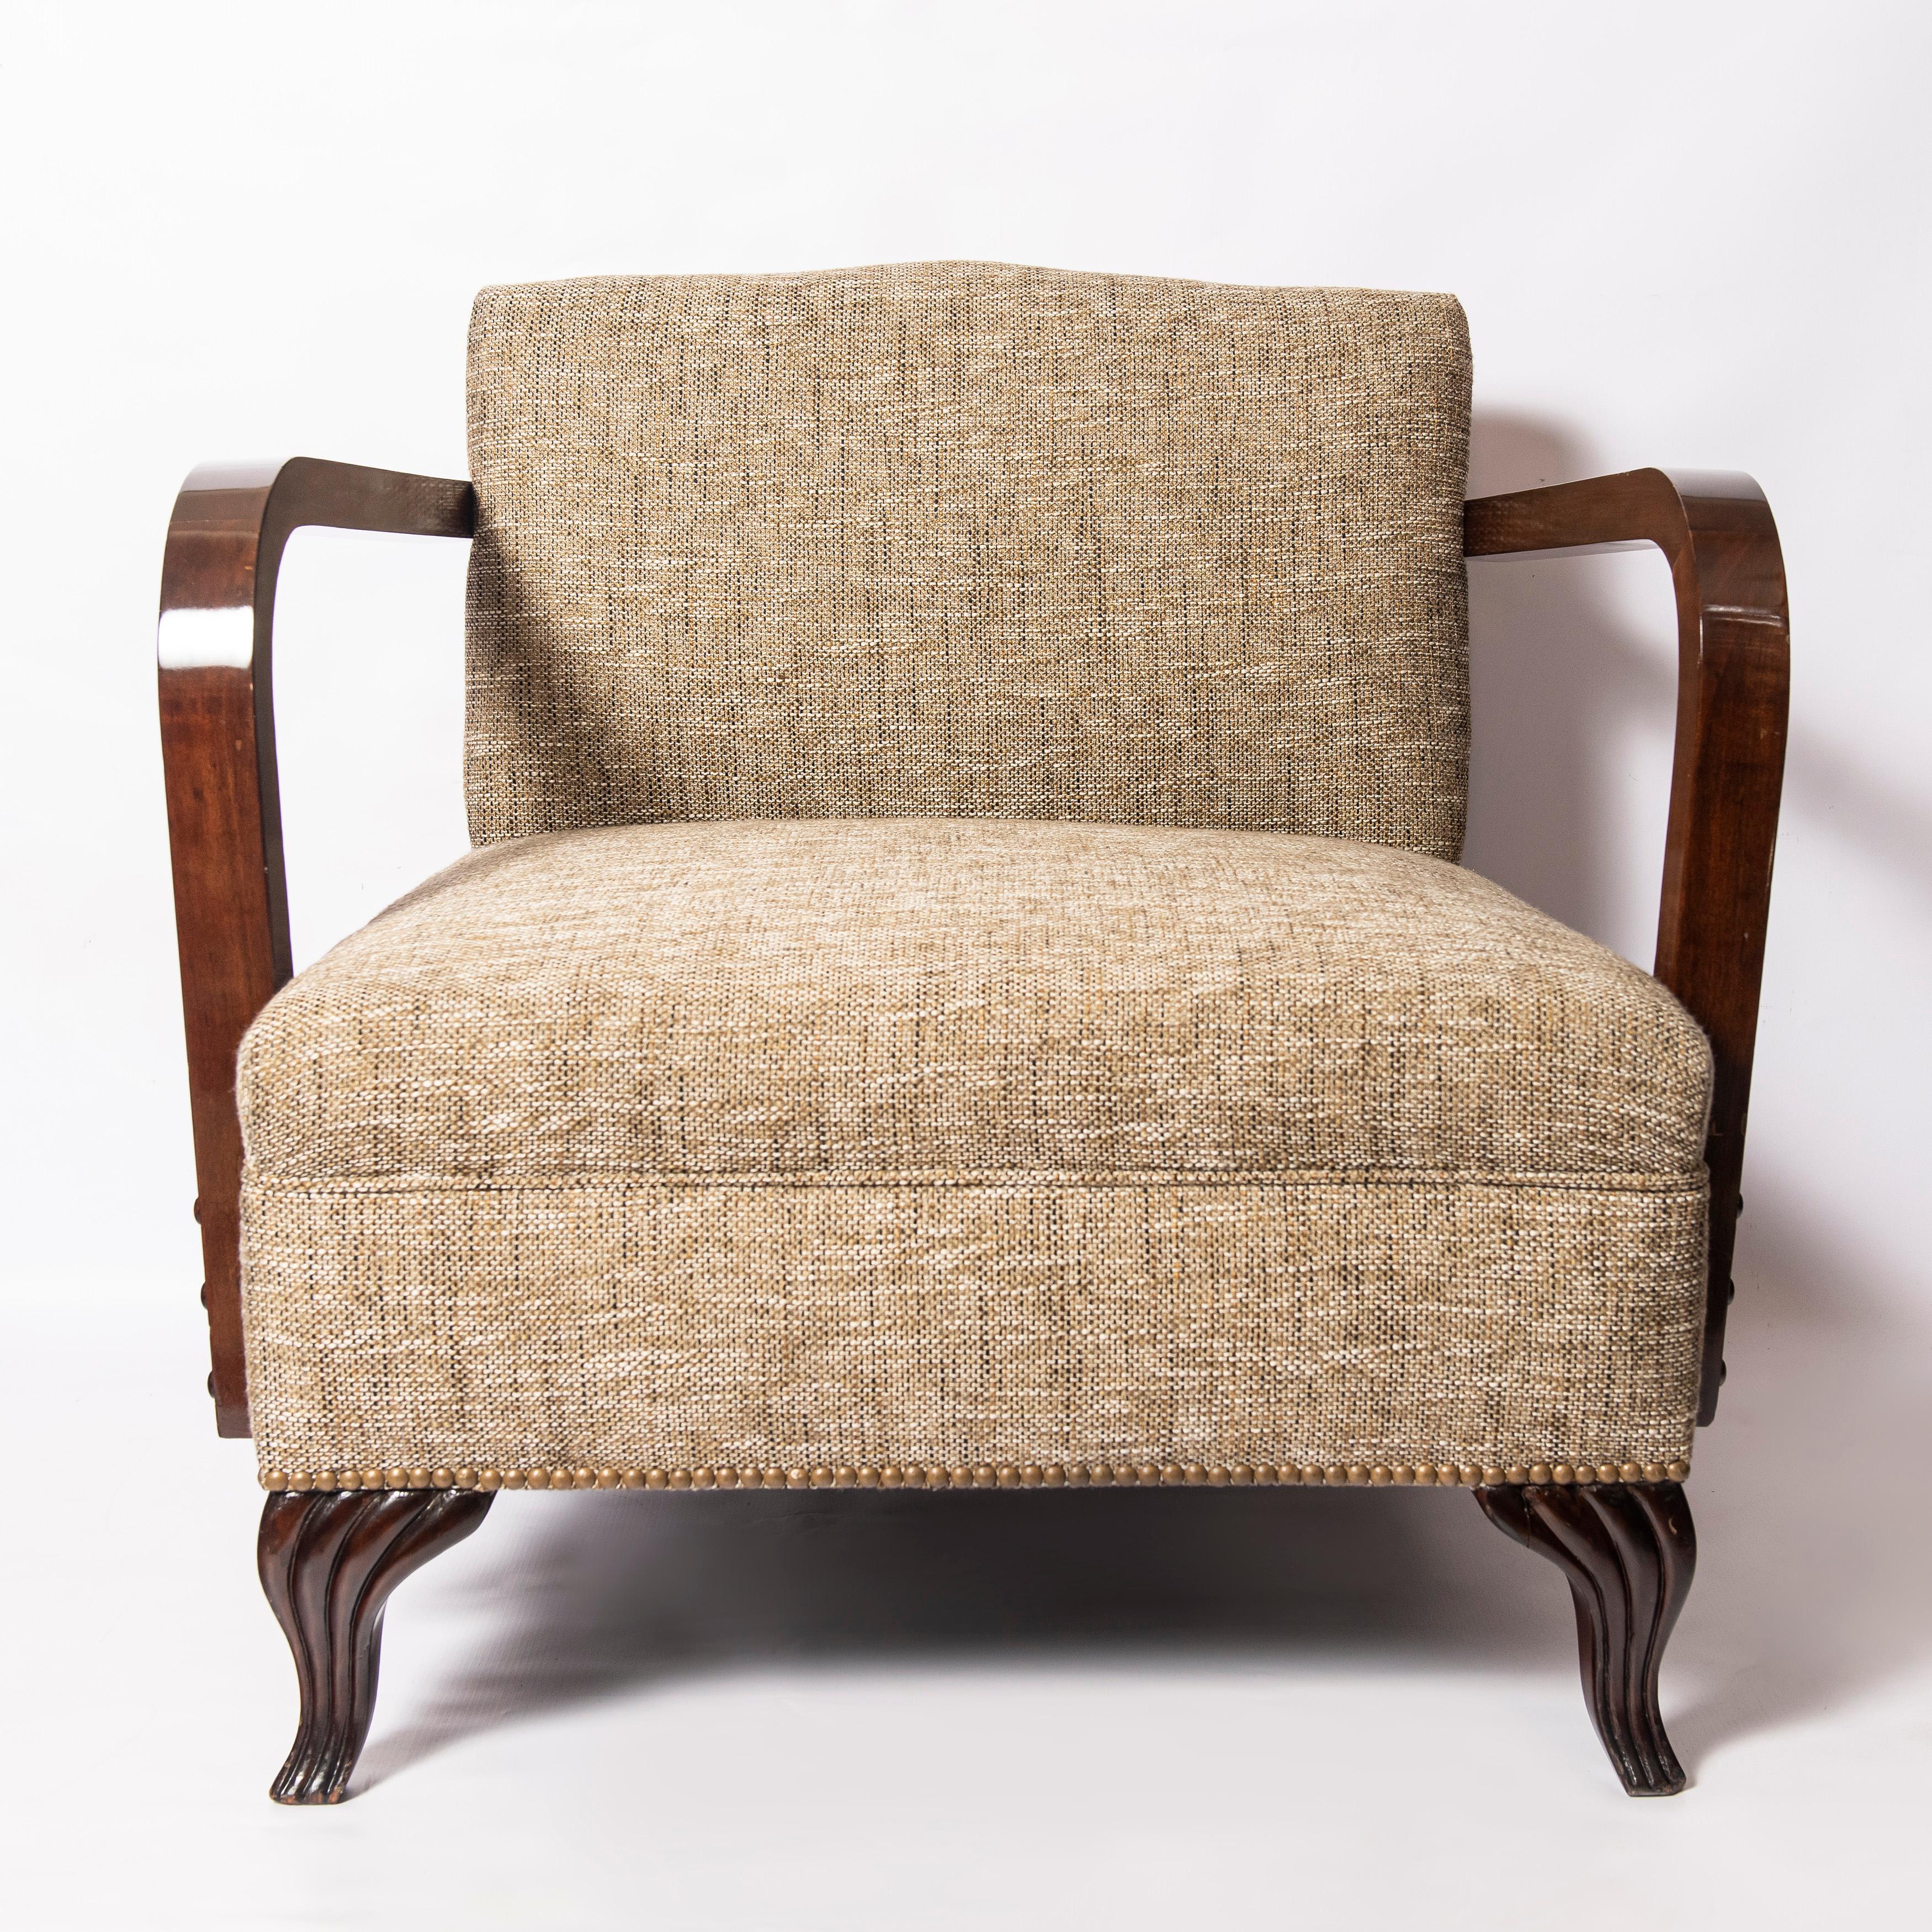 Pair of wood and fabric armchairs. Art Deco Period. France, circa 1940.